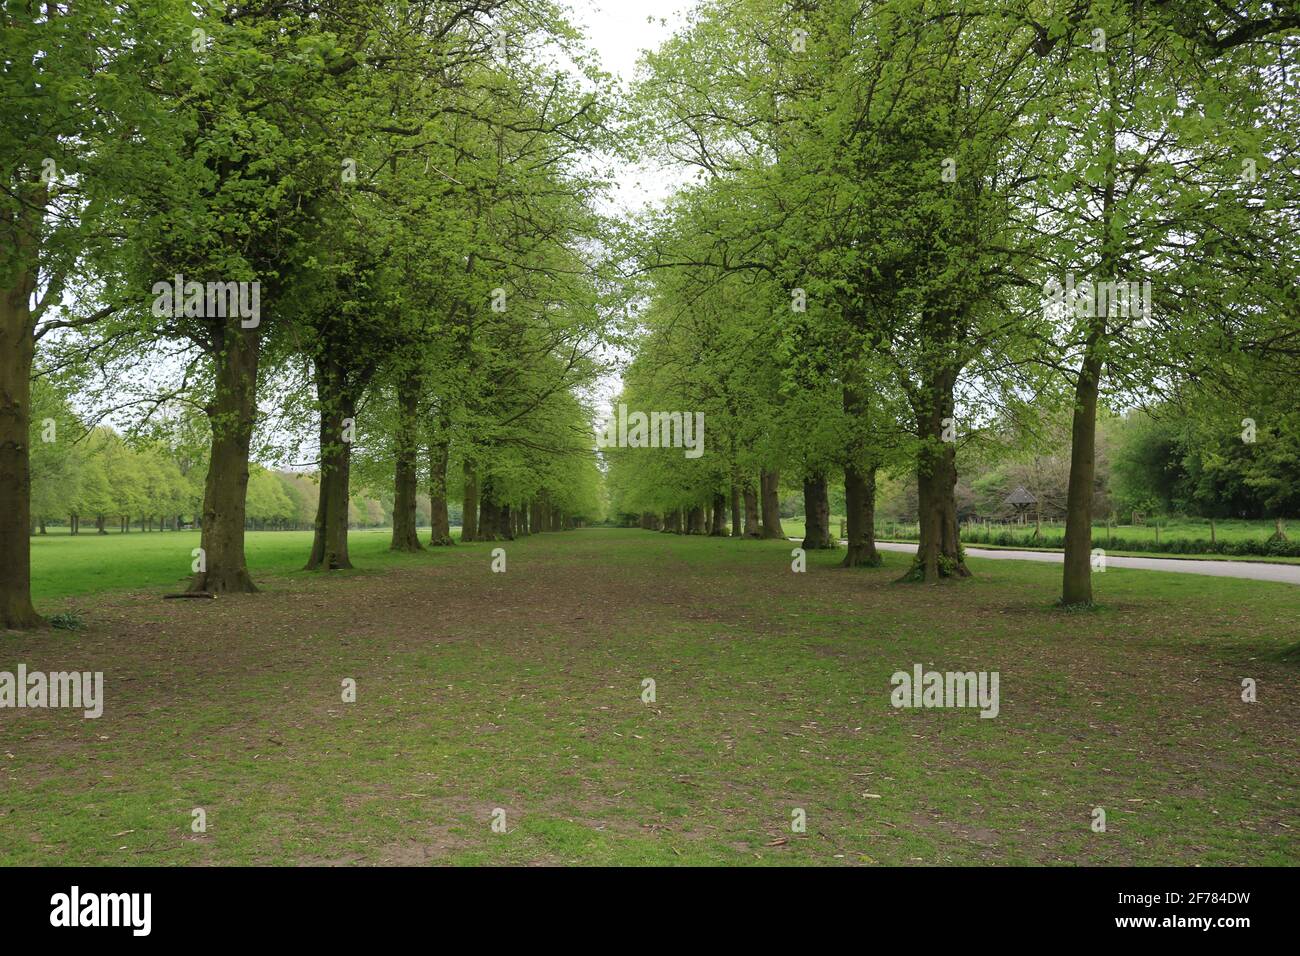 Two lines of trees in Marbury Park, Cheshire, UK Stock Photo